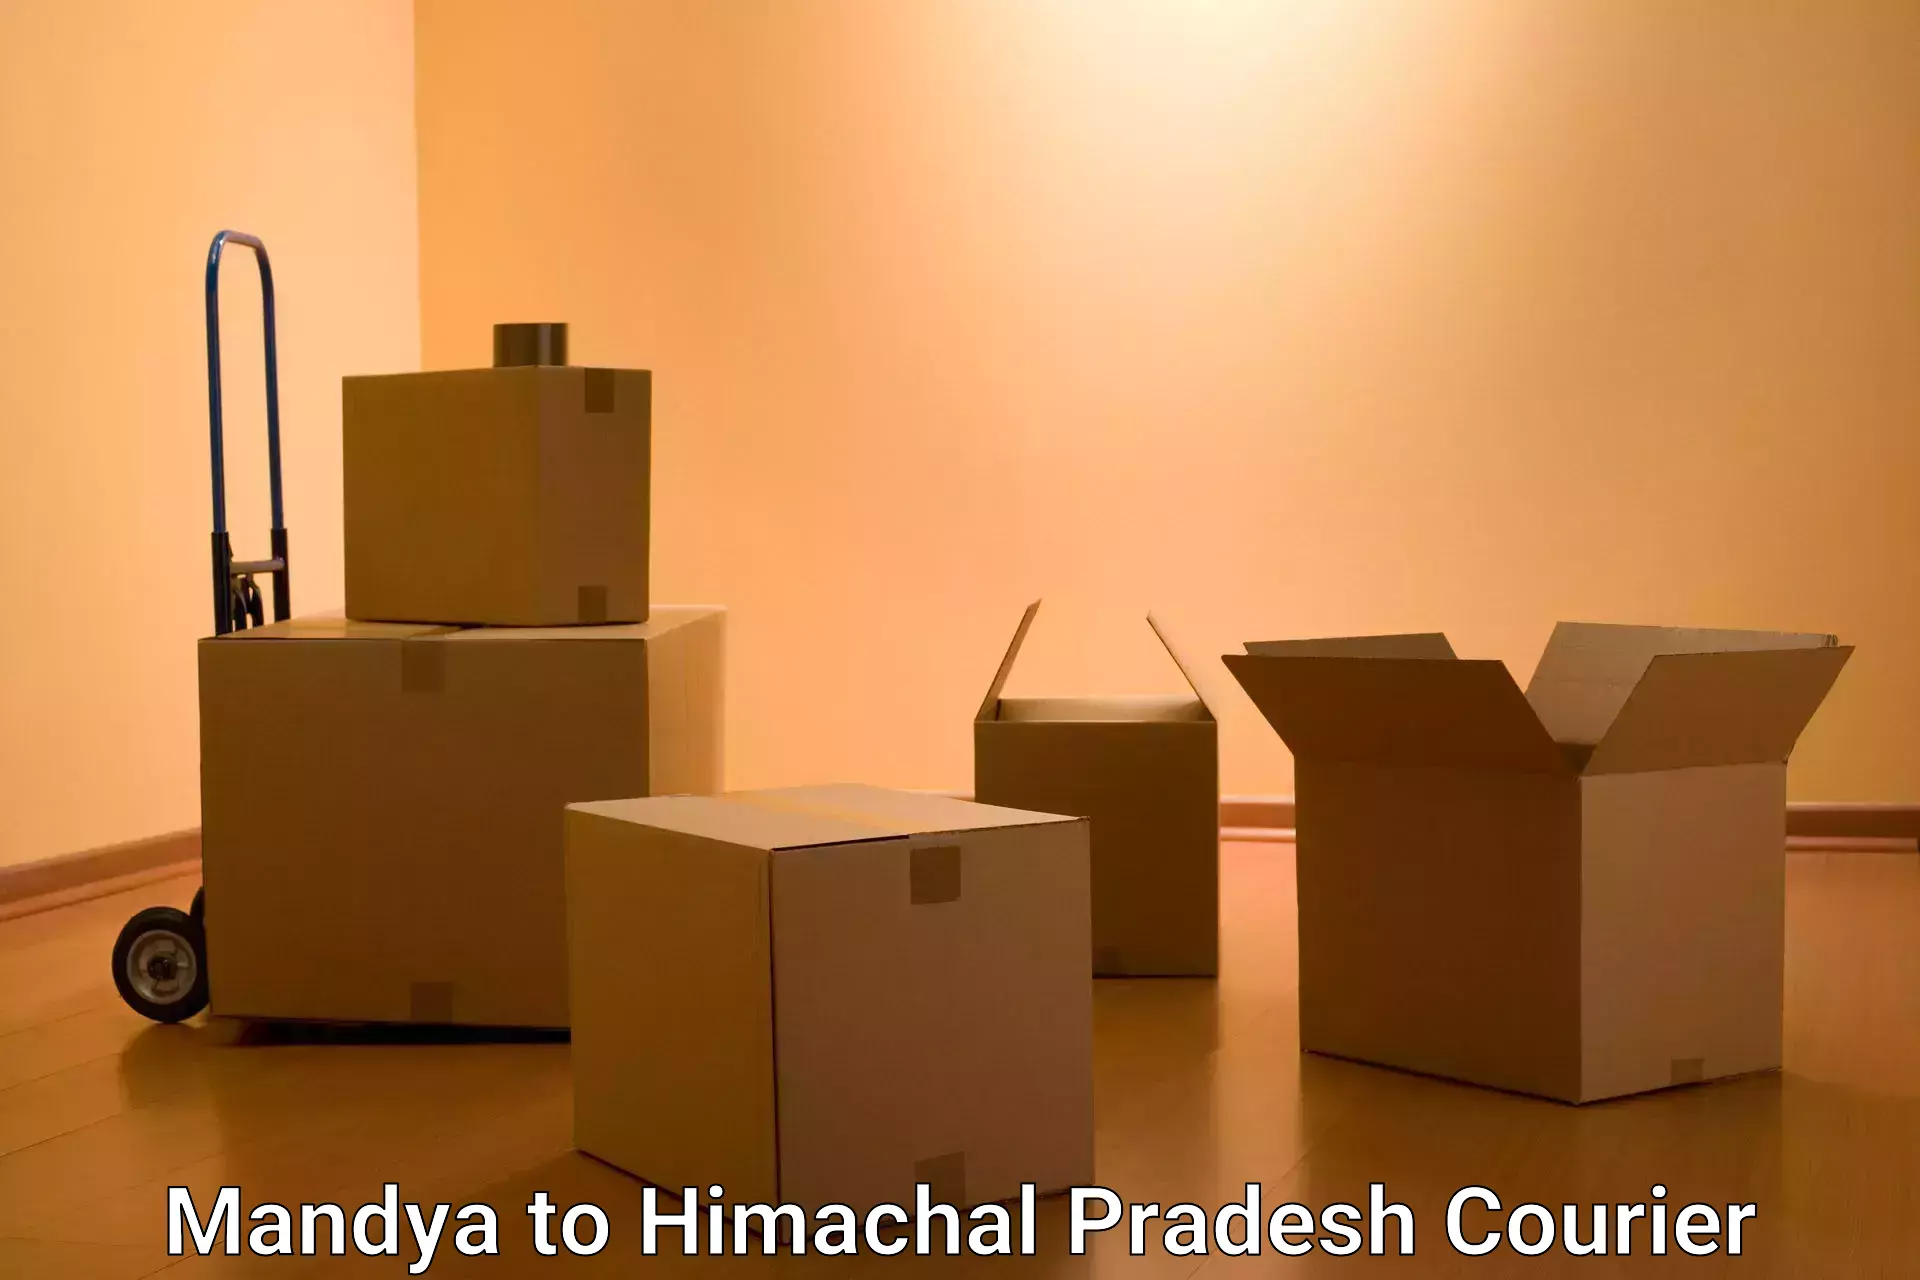 24-hour delivery options Mandya to YS Parmar University of Horticulture and Forestry Solan